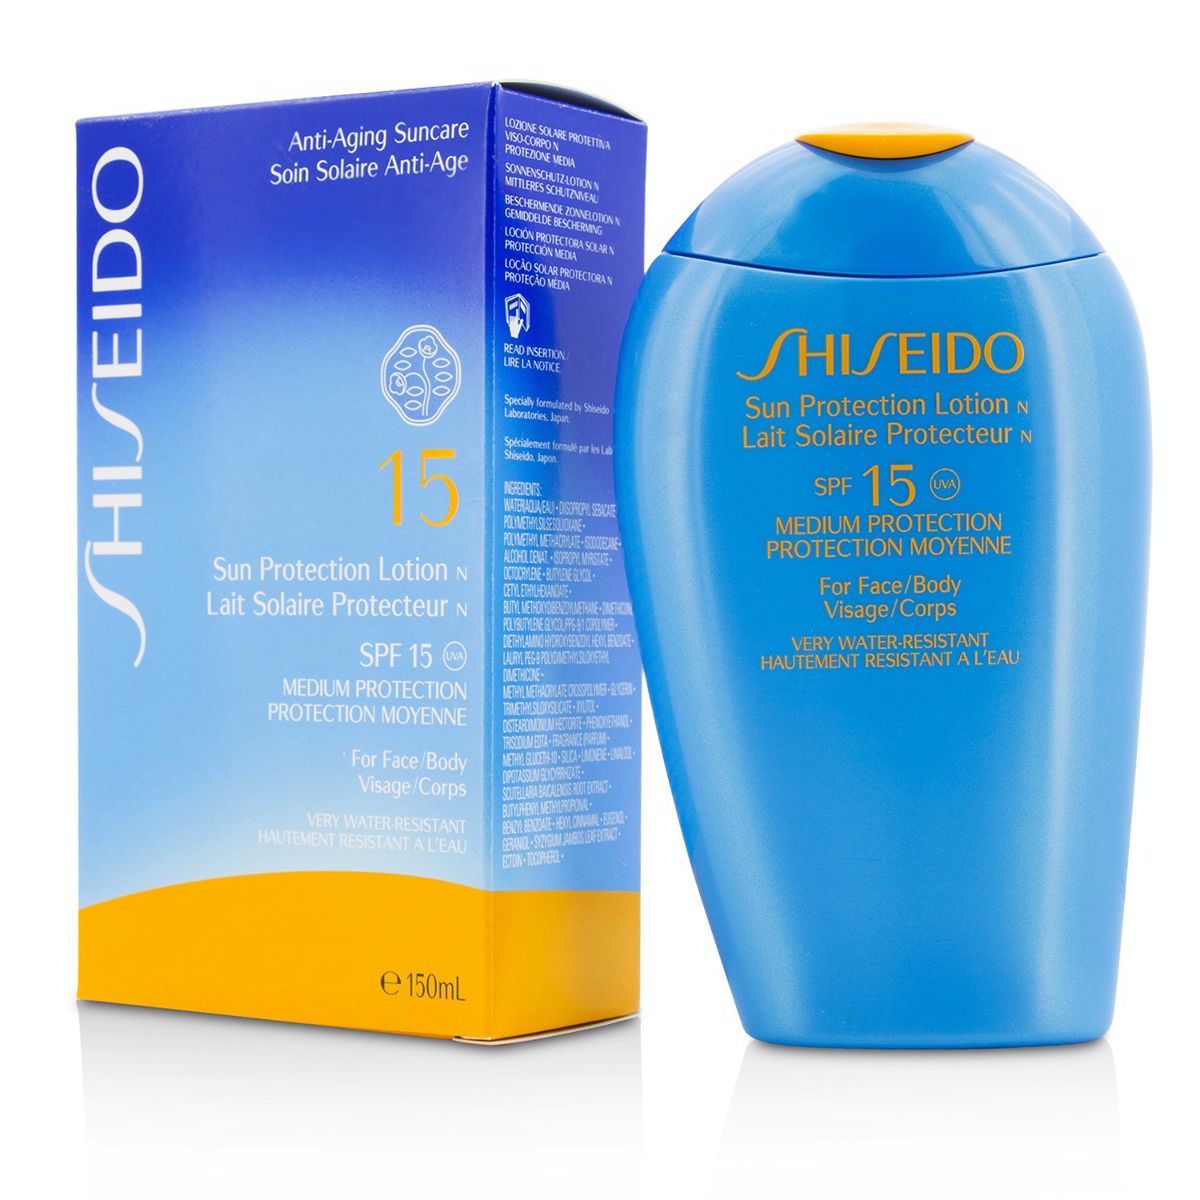 Sun Protection Lotion N SPF 15 (For Face  Body) Shiseido Image